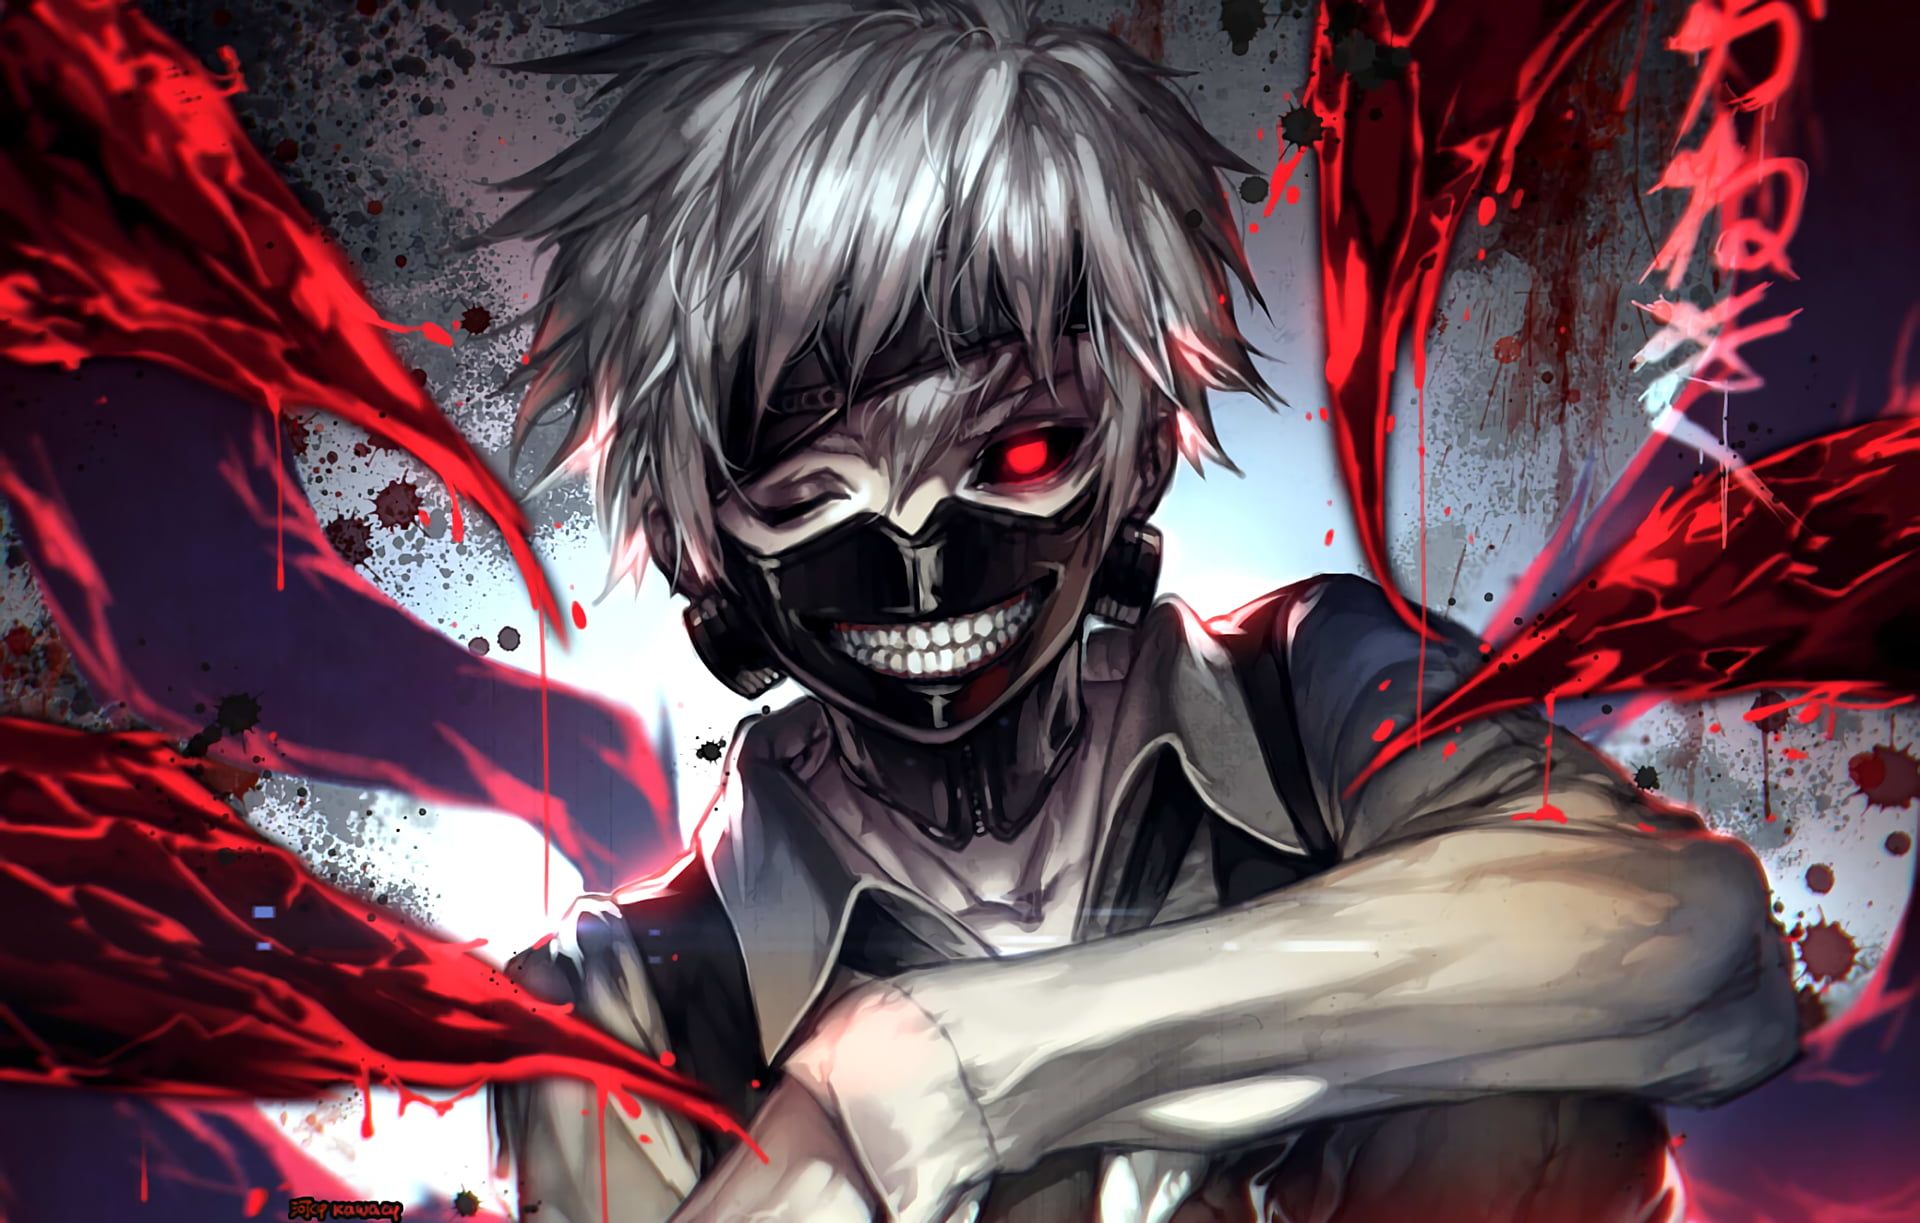 White haired male anime character wallpaper, anime, Tokyo Ghoul